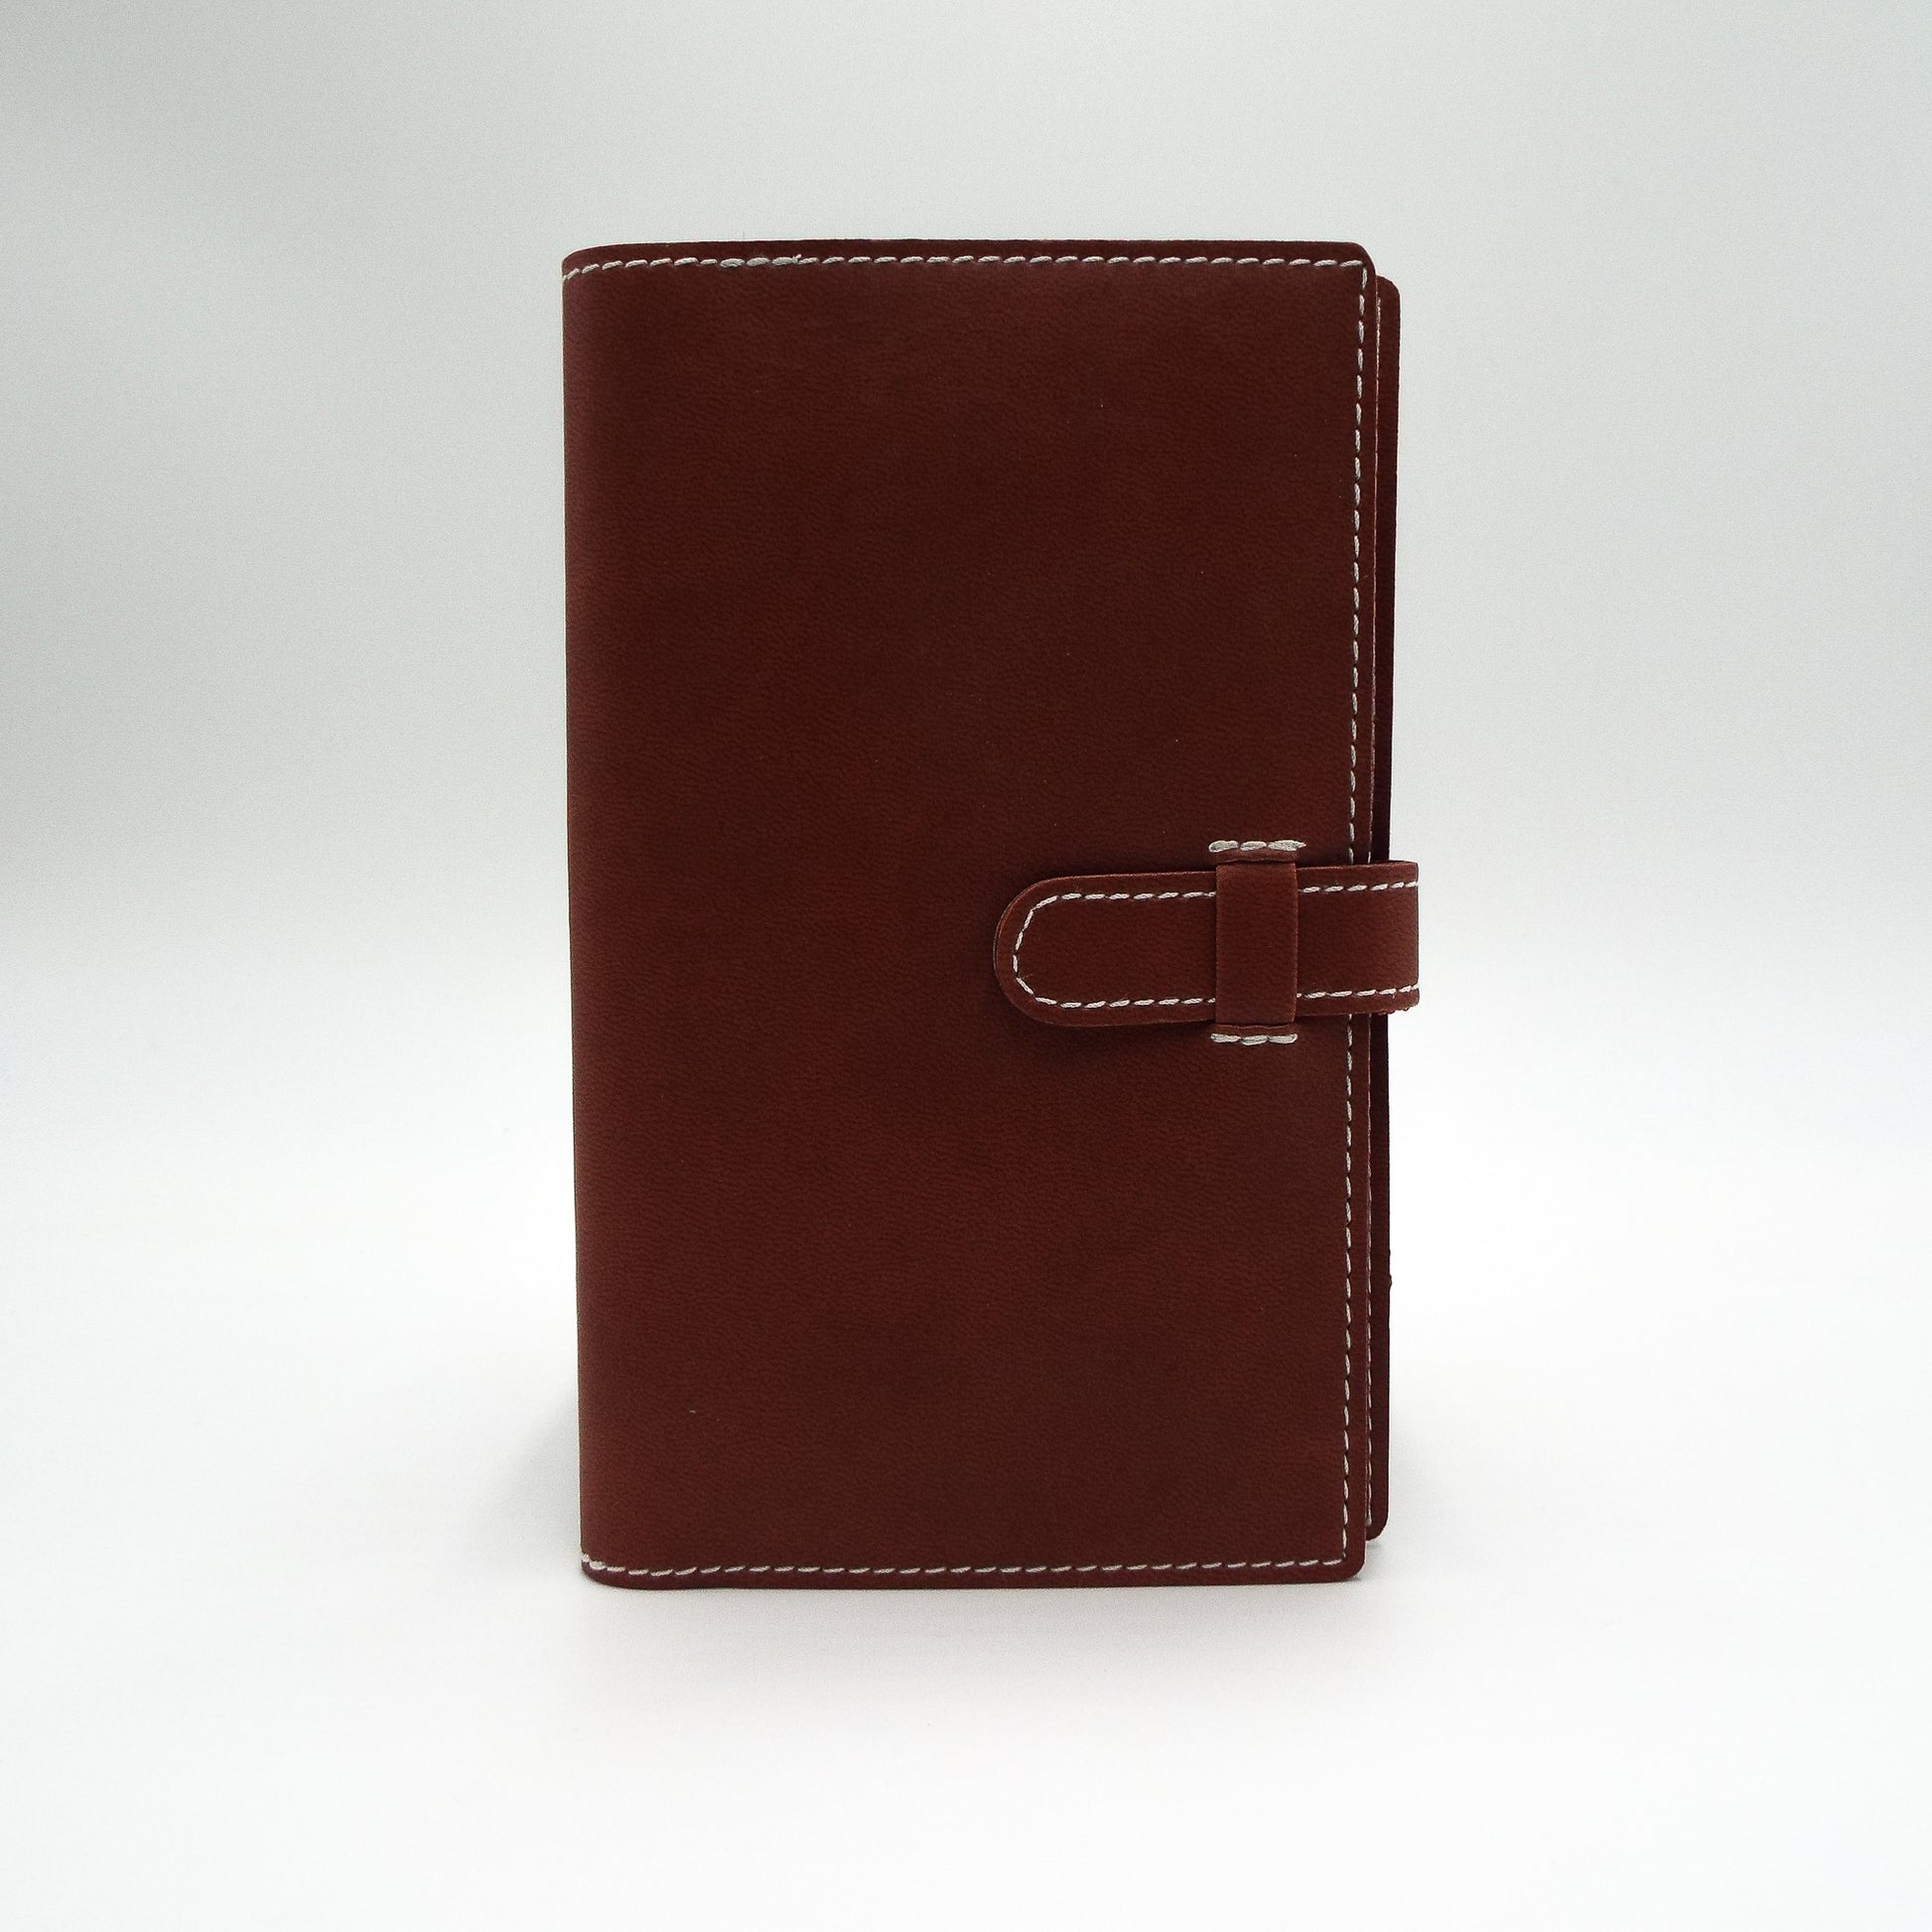 Faux Leather Cover   This  4" x 6-1/2" journal or planner cover is a great size for your desk, briefcase, purse, or car. With a vegan leather exterior, this economically and cruelty free cover is the perfect addition to your organizational system.  Dimensions:  4" x 6-1/2"  Insert Size: 3" x 6" to 3-1/2" x 6-1/2"  Cover Color: Black, Brown, or Navy  Manufacturer: Castelli